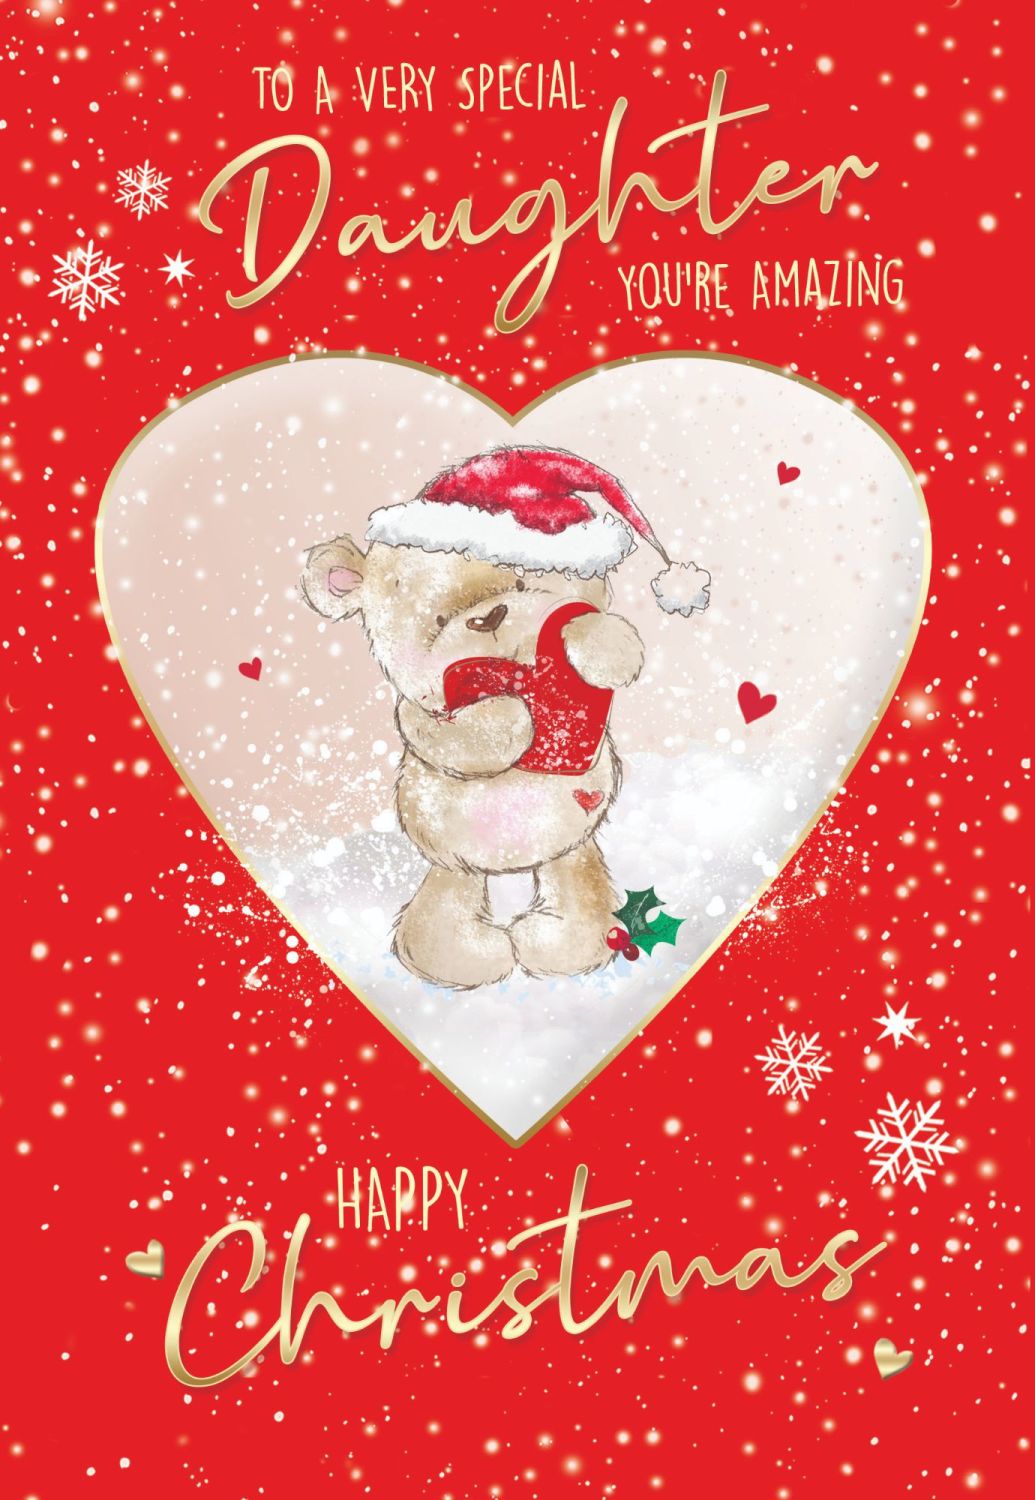  To A Very Special Daughter Christmas Card - DAUGHTER You're AMAZING Happy 